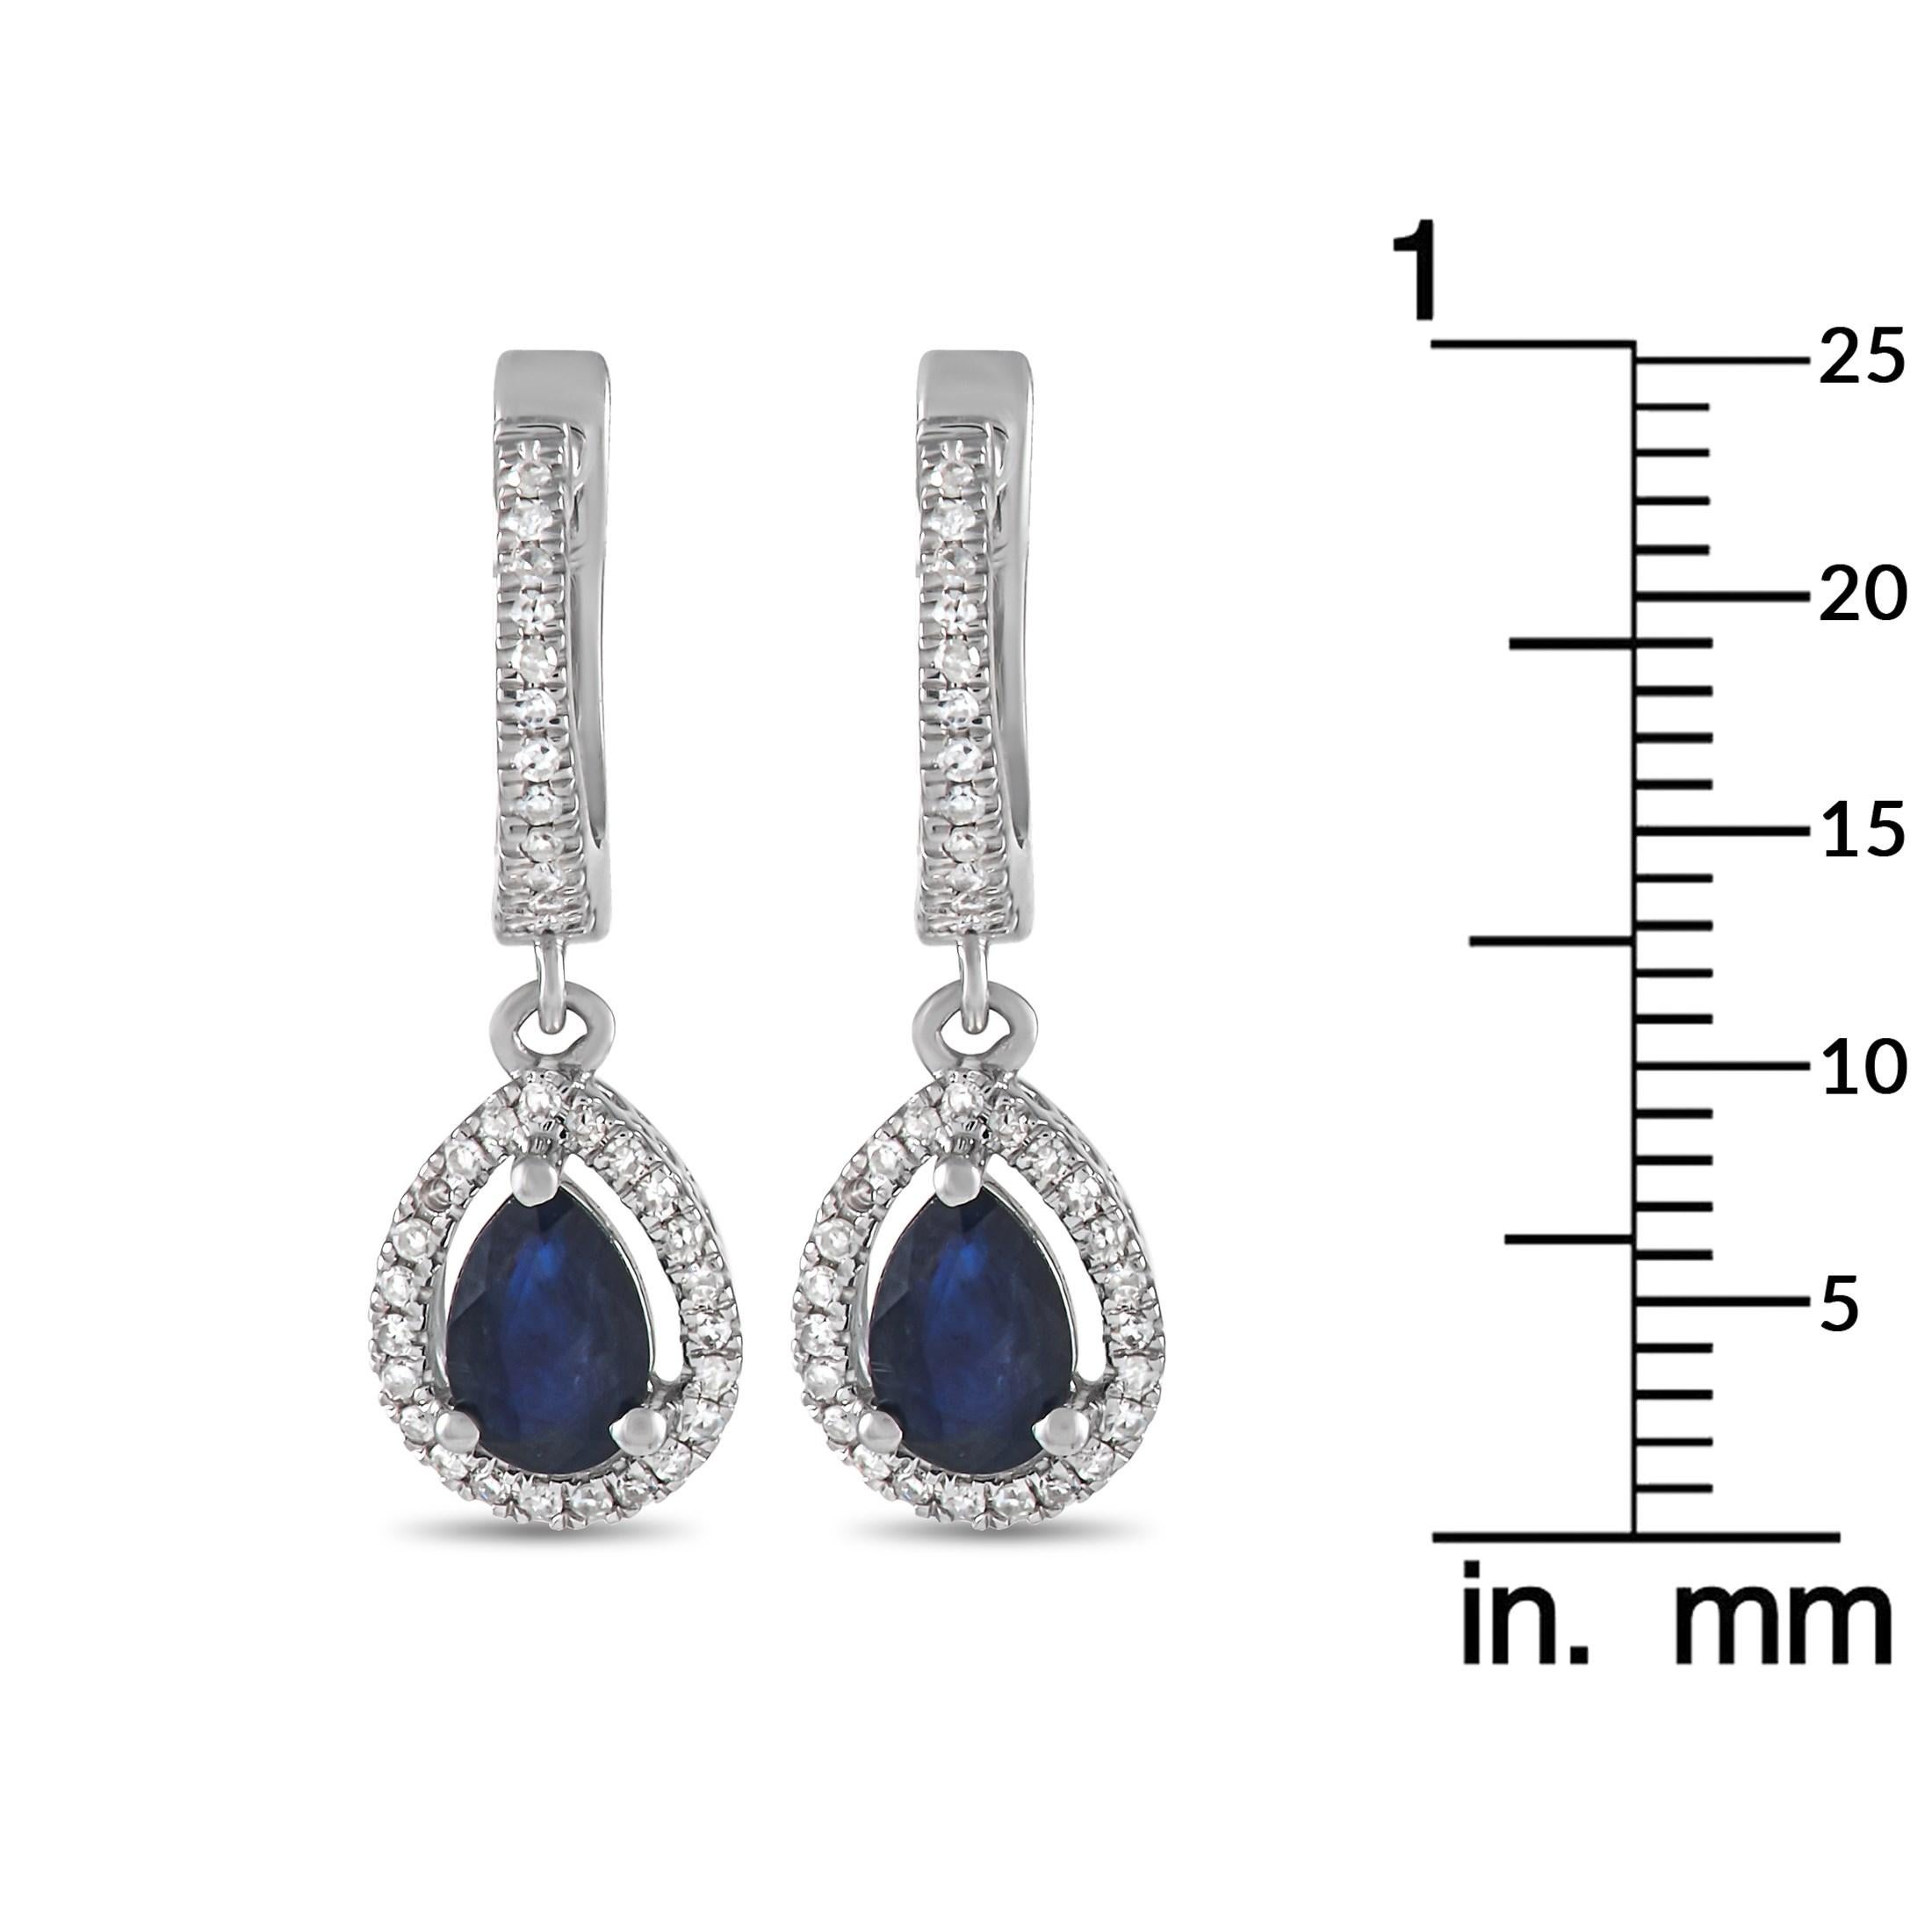 Mixed Cut LB Exclusive 14K White Gold 0.21 Ct Diamond and Sapphire Earrings